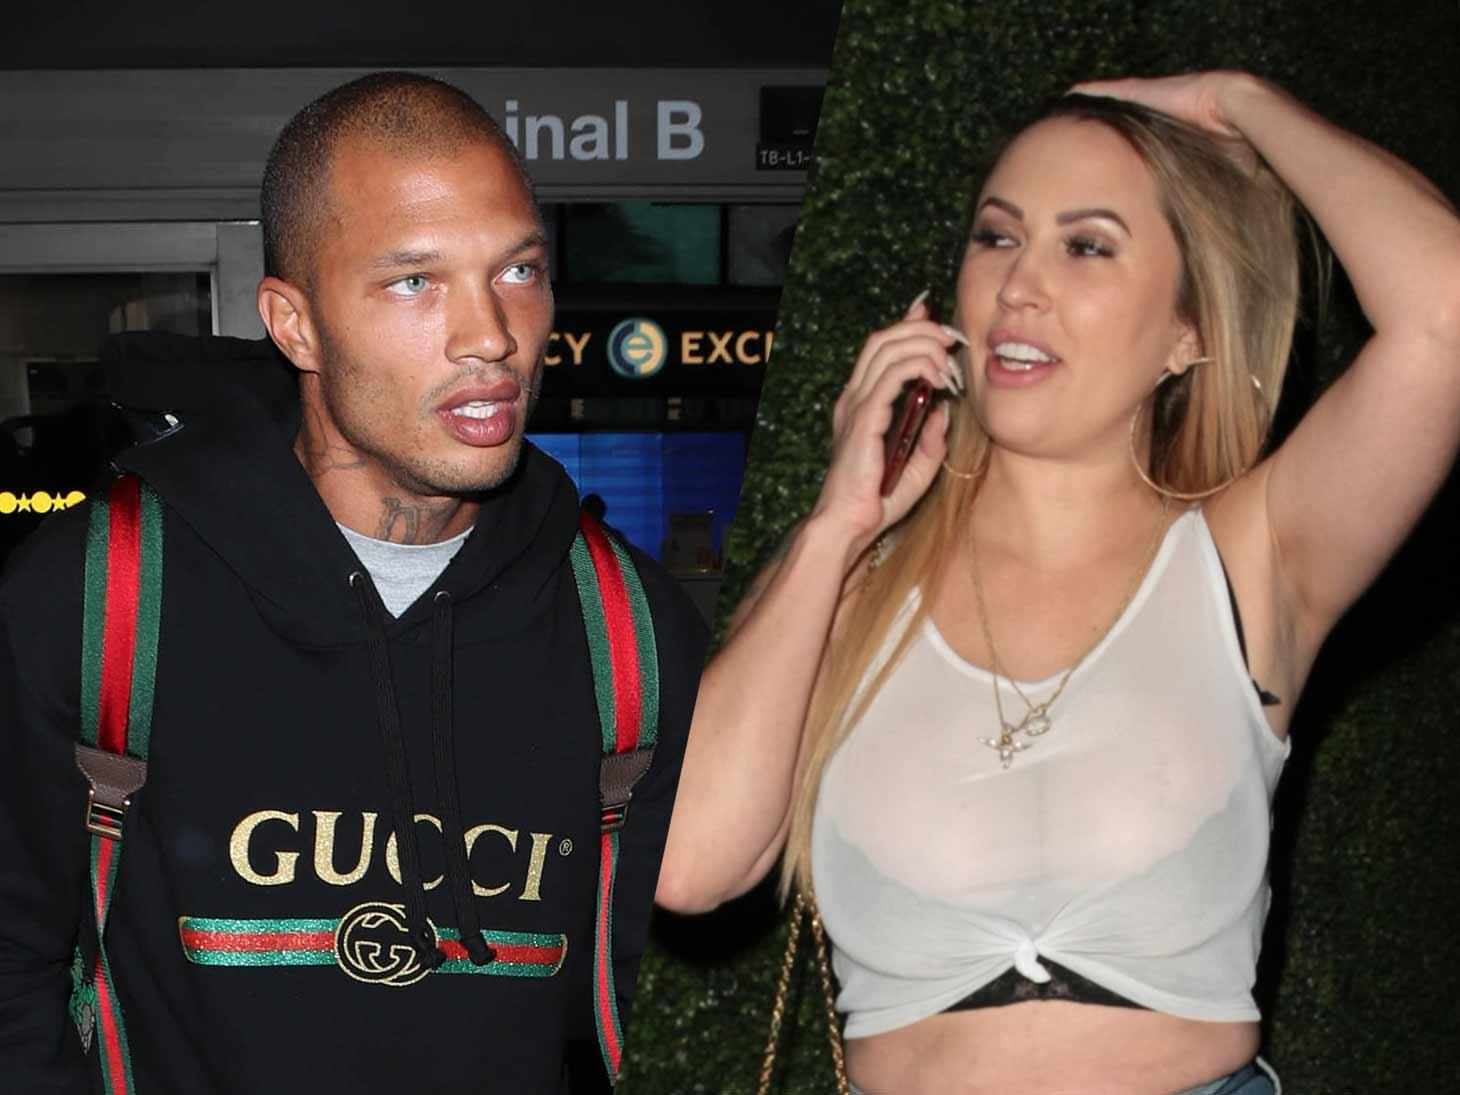 Model Jeremy Meeks Will Pay $1,000 Per Month in Child Support